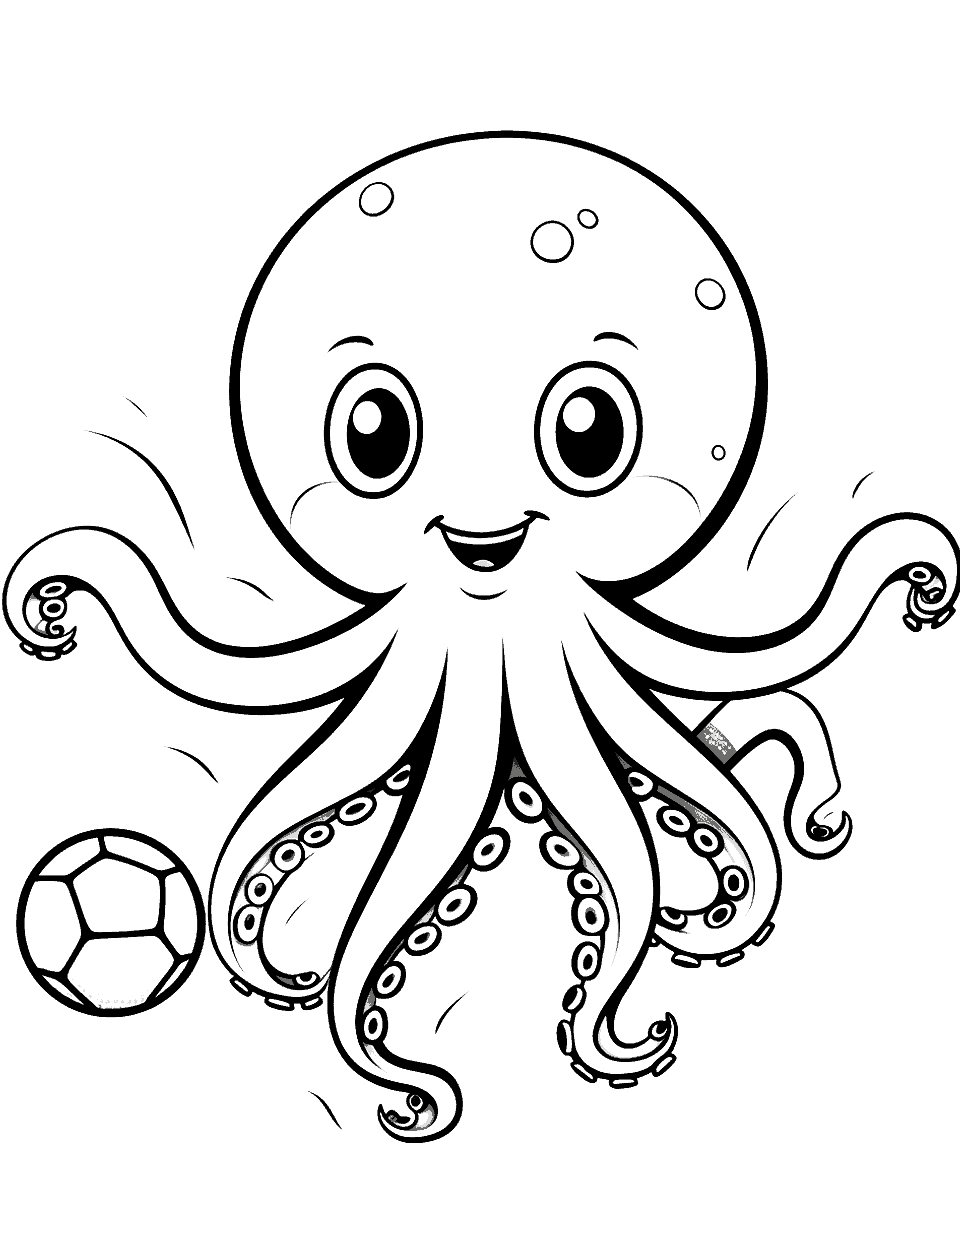 Octopus Playing Soccer Coloring Page - An octopus energetically playing soccer, kicking a ball.